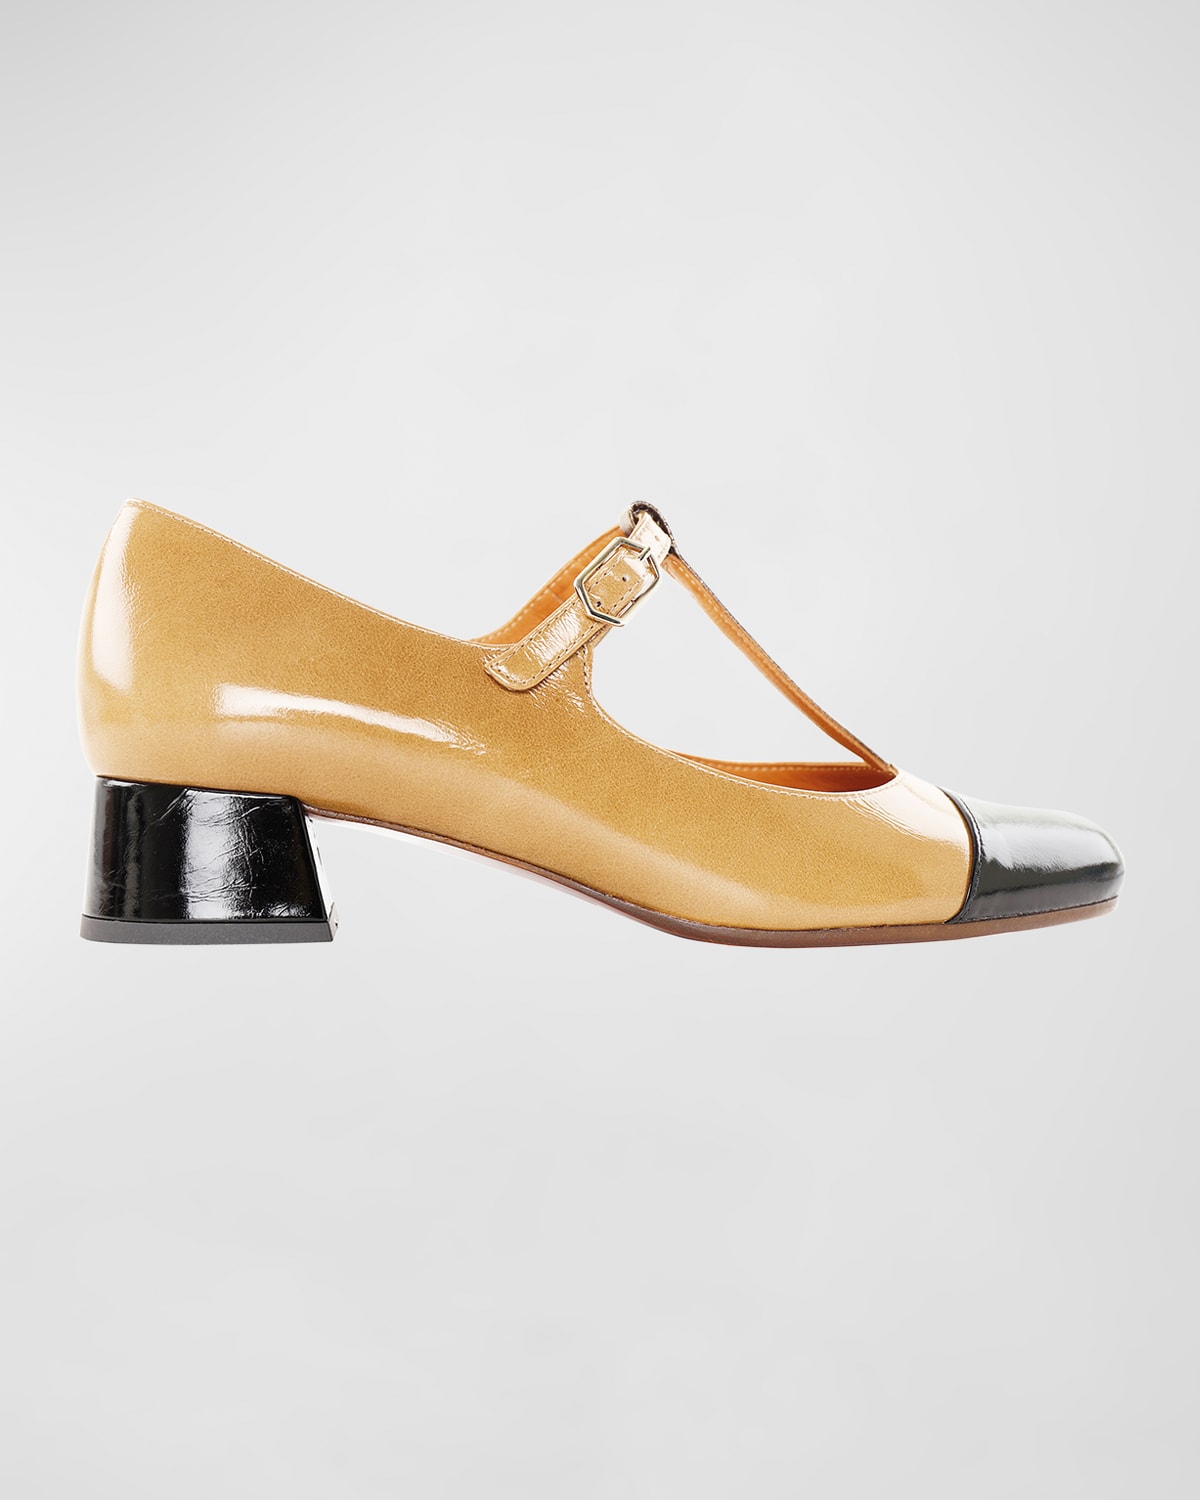 Chie Mihara Revita Colorblock Patent Leather Mary Jane Pumps In Brown